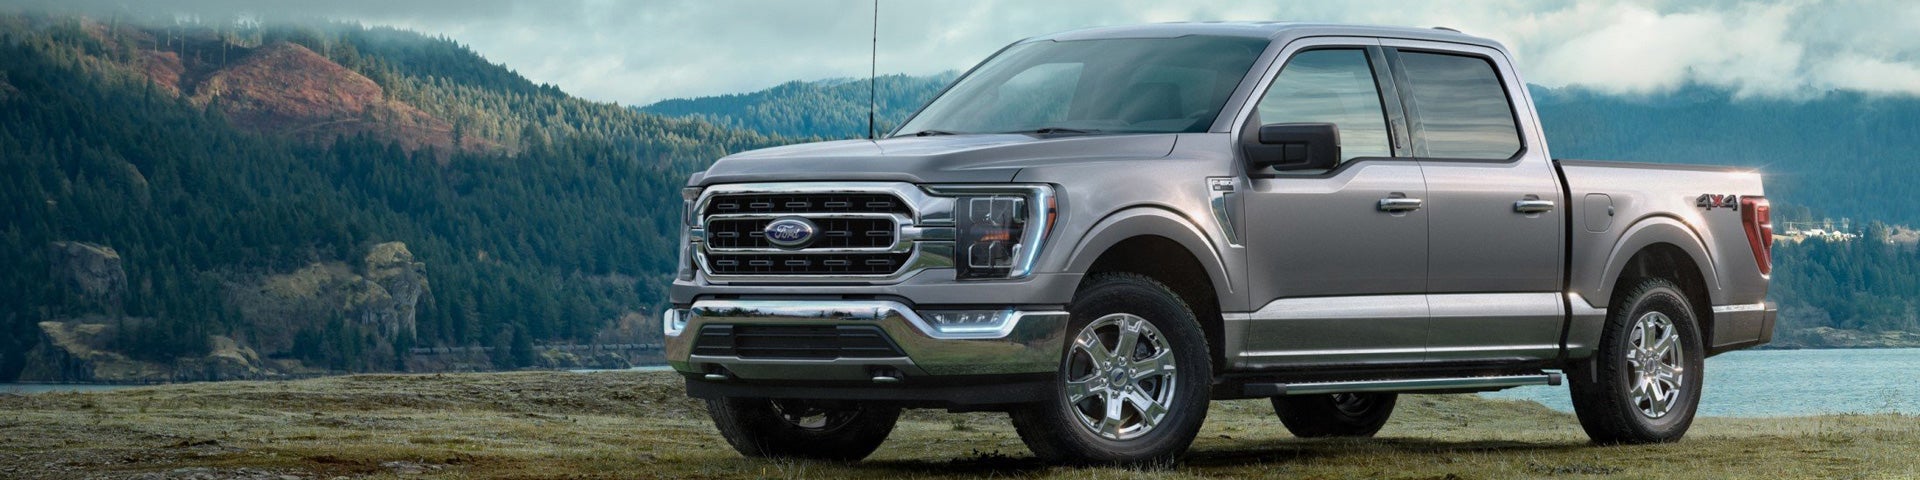 2021 Ford F-150 For Sale